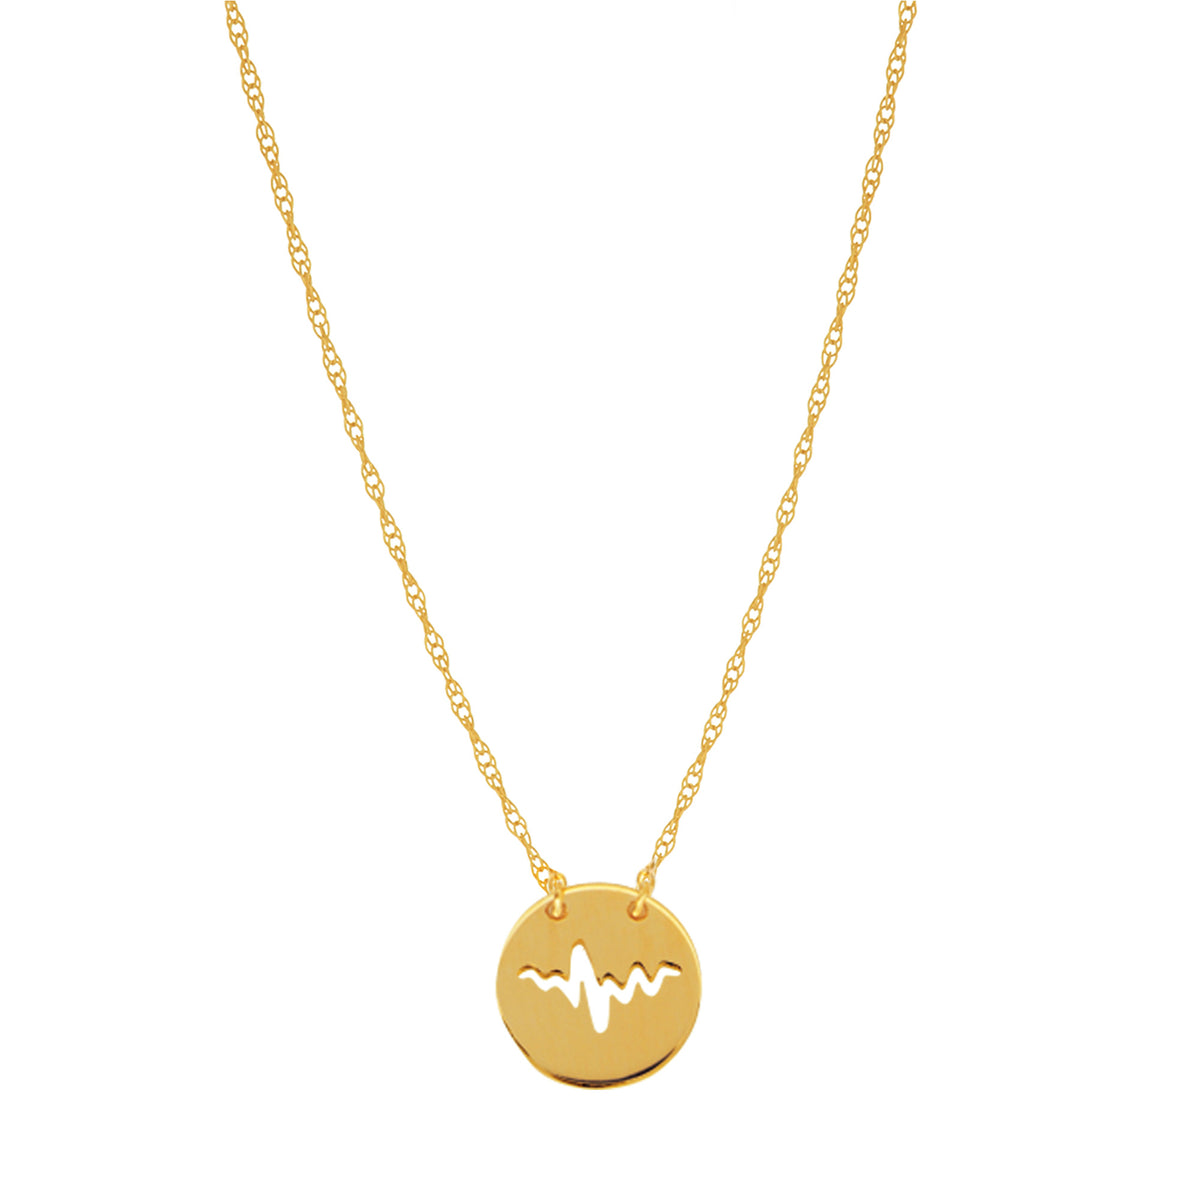 14K Yellow Gold Mini Heartbeat Pendant Necklace, 16" To 18" Adjustable fine designer jewelry for men and women